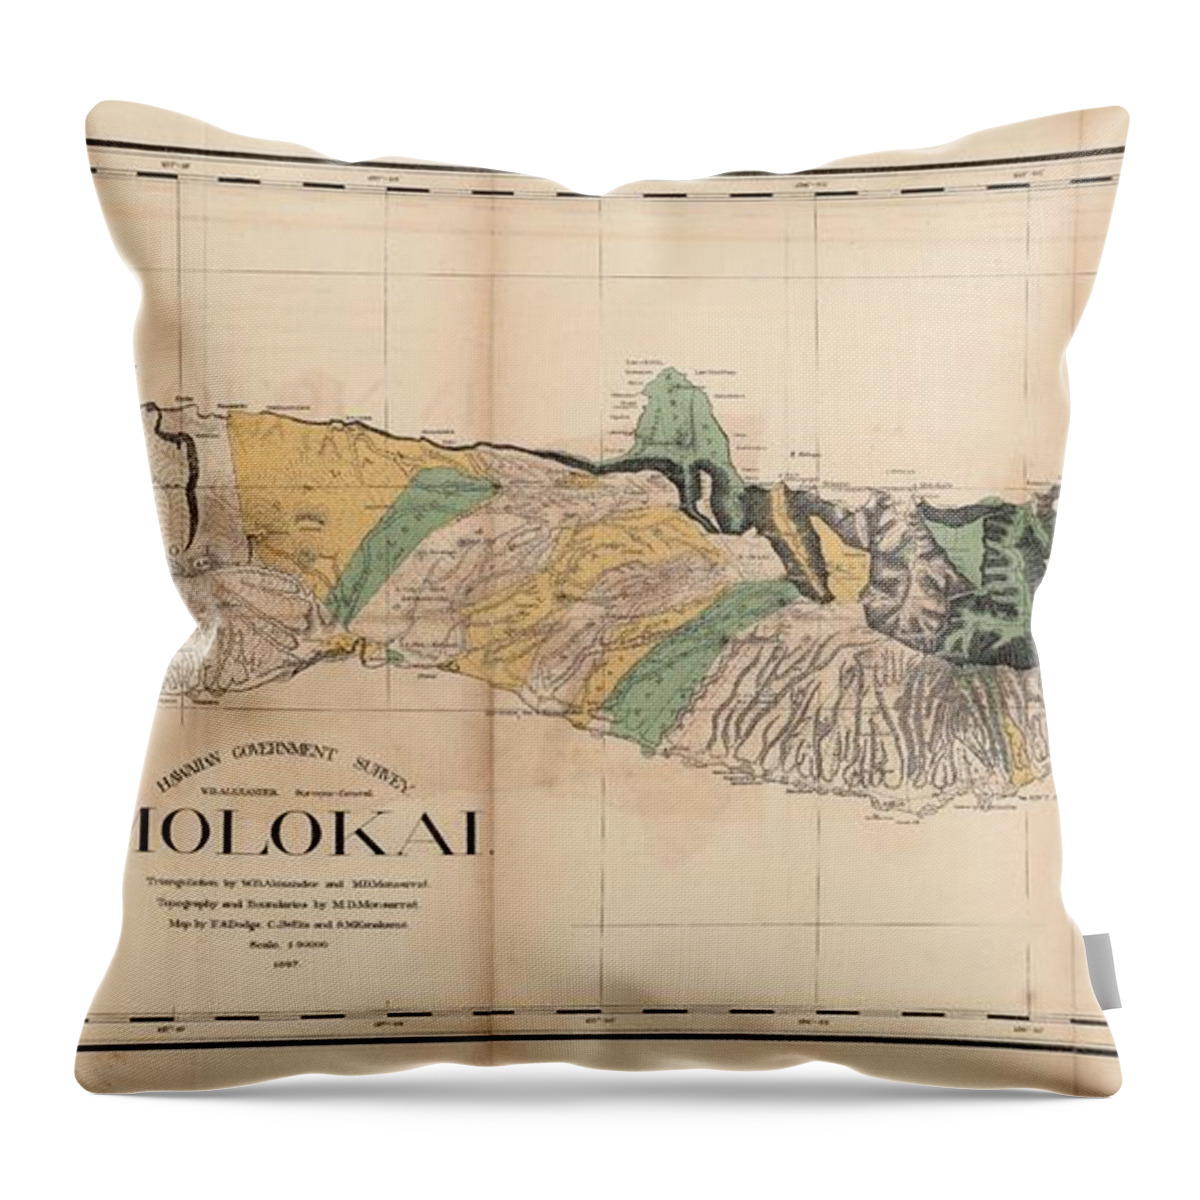 Antique Map Of Molokai Throw Pillow featuring the drawing Antique Maps - Old Cartographic maps - Antique Map of Molokai, Hawaiian Island, 1897 by Studio Grafiikka